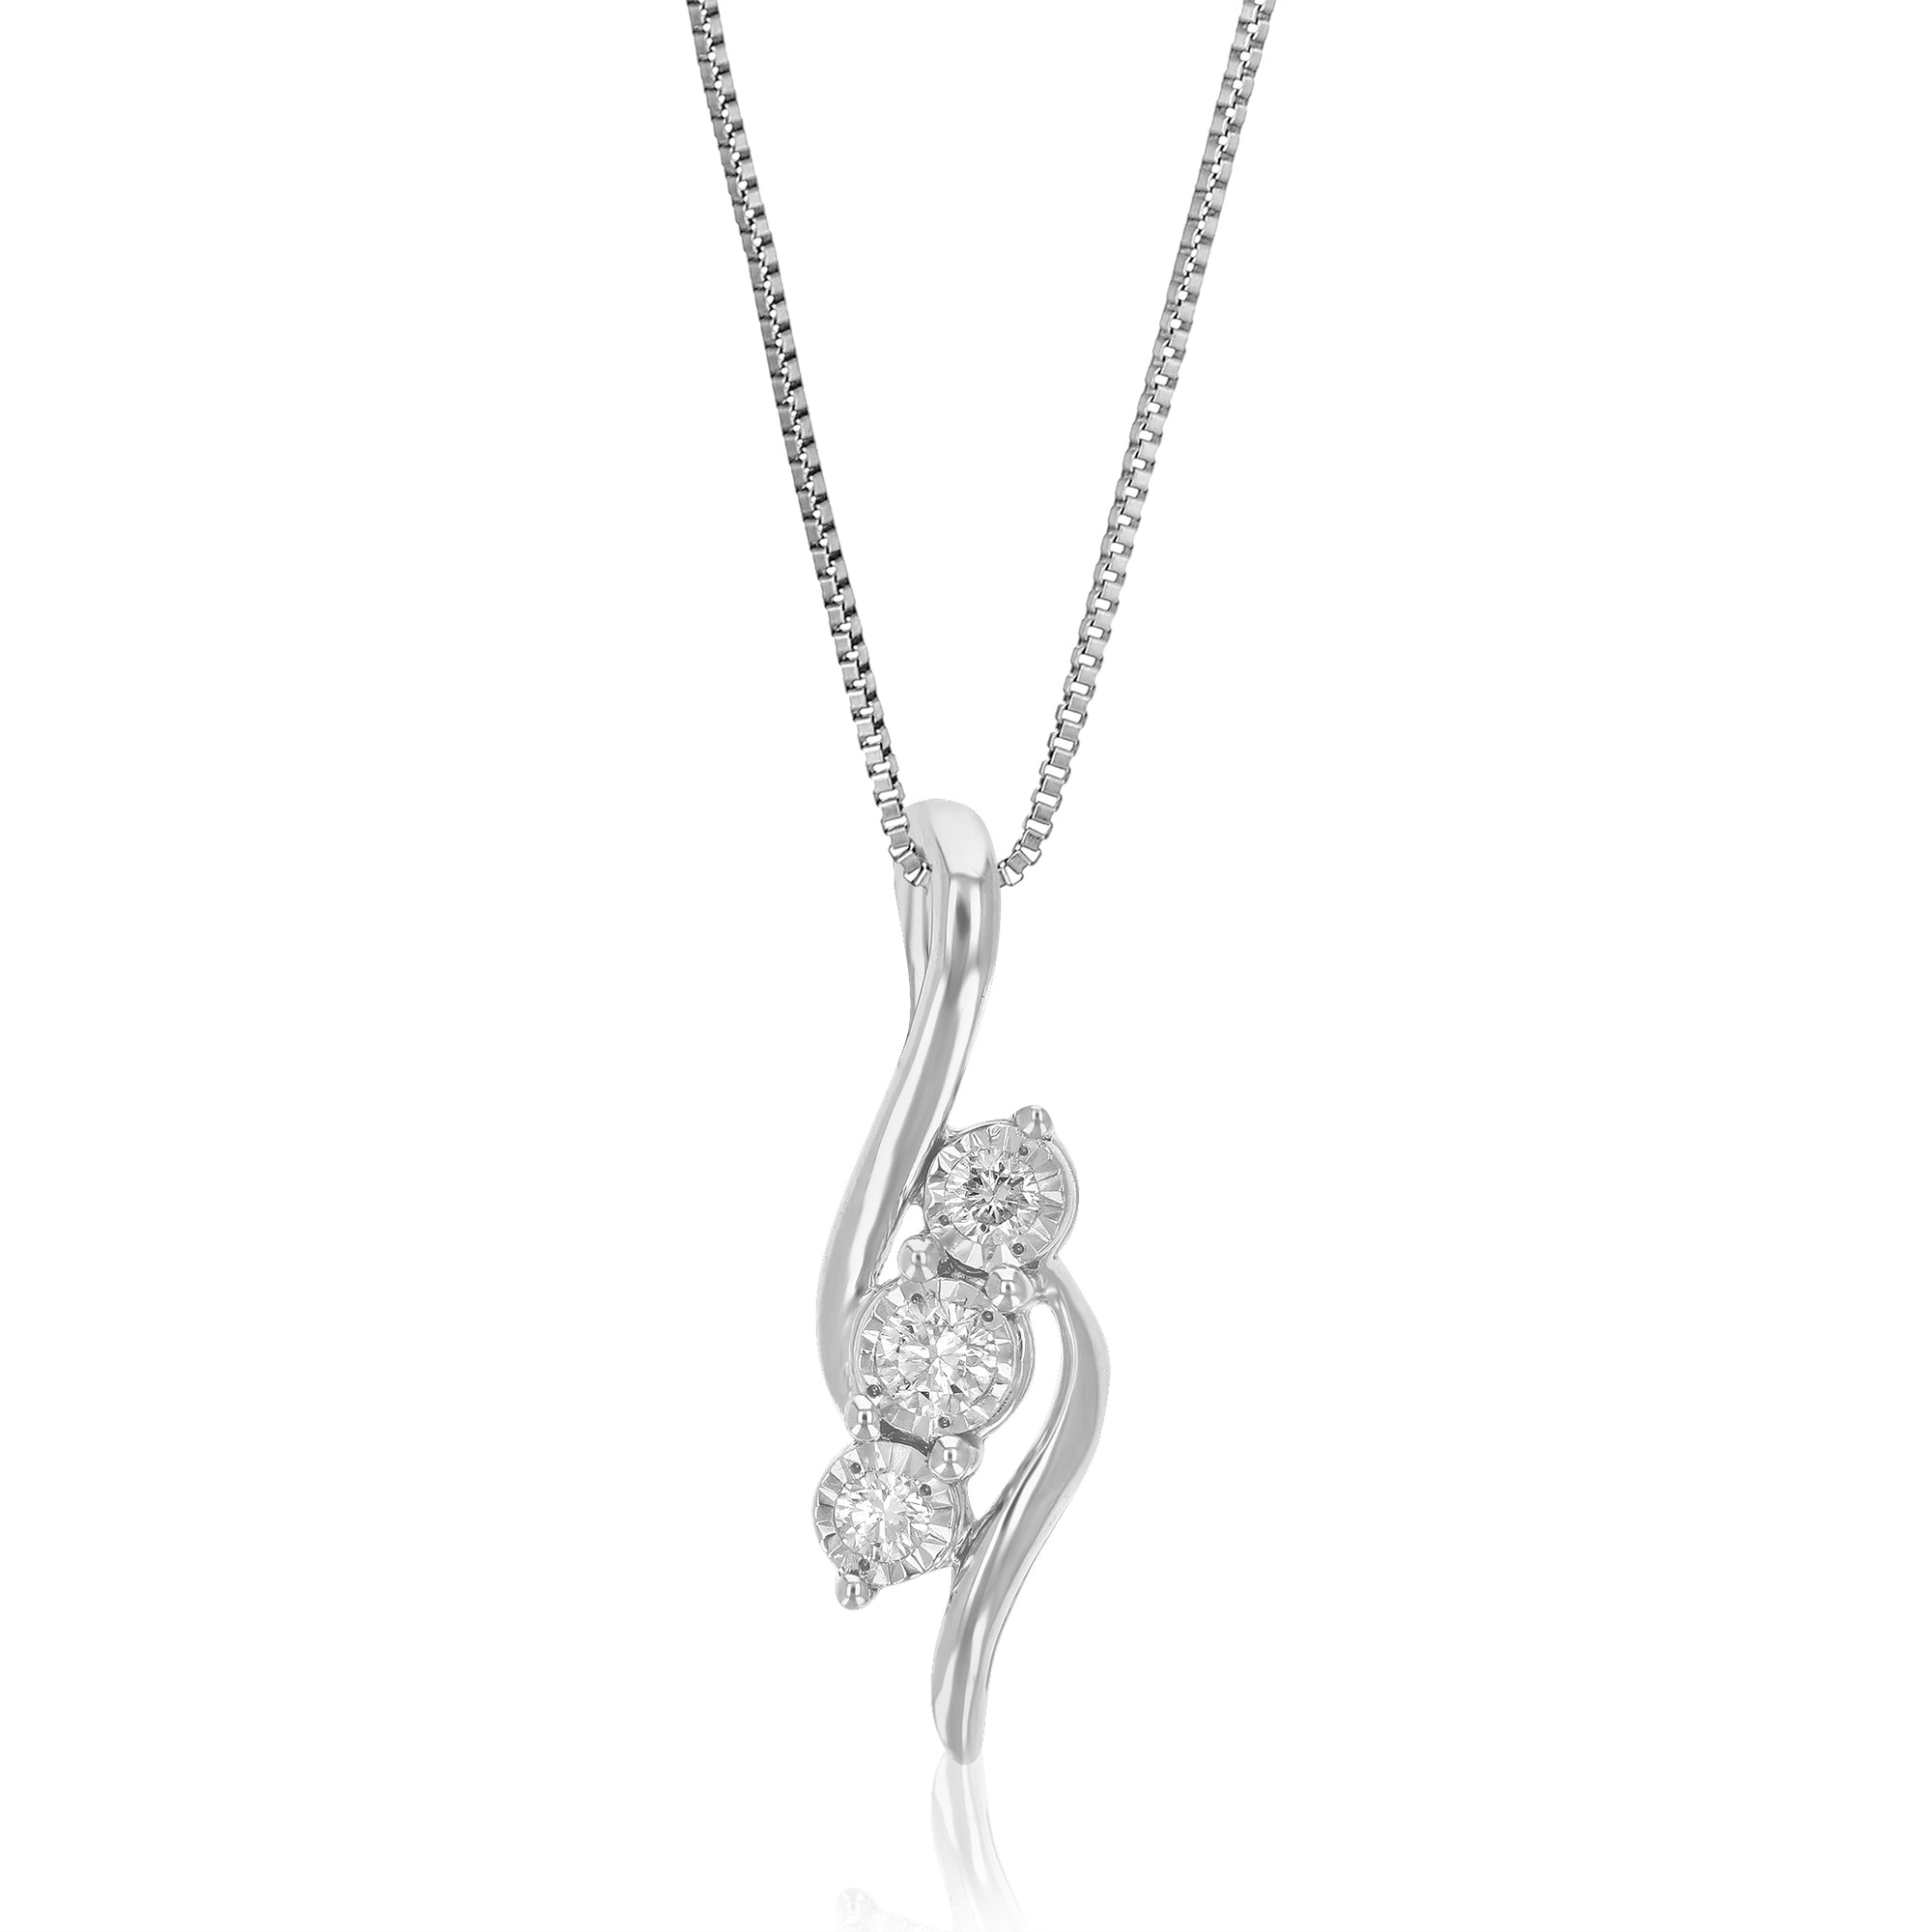 1/10 cttw Diamond Pendant Necklace for Women, Lab Grown Diamond Bypass Pendant Necklace in .925 Sterling Silver with Chain, Size 2/3 Inch